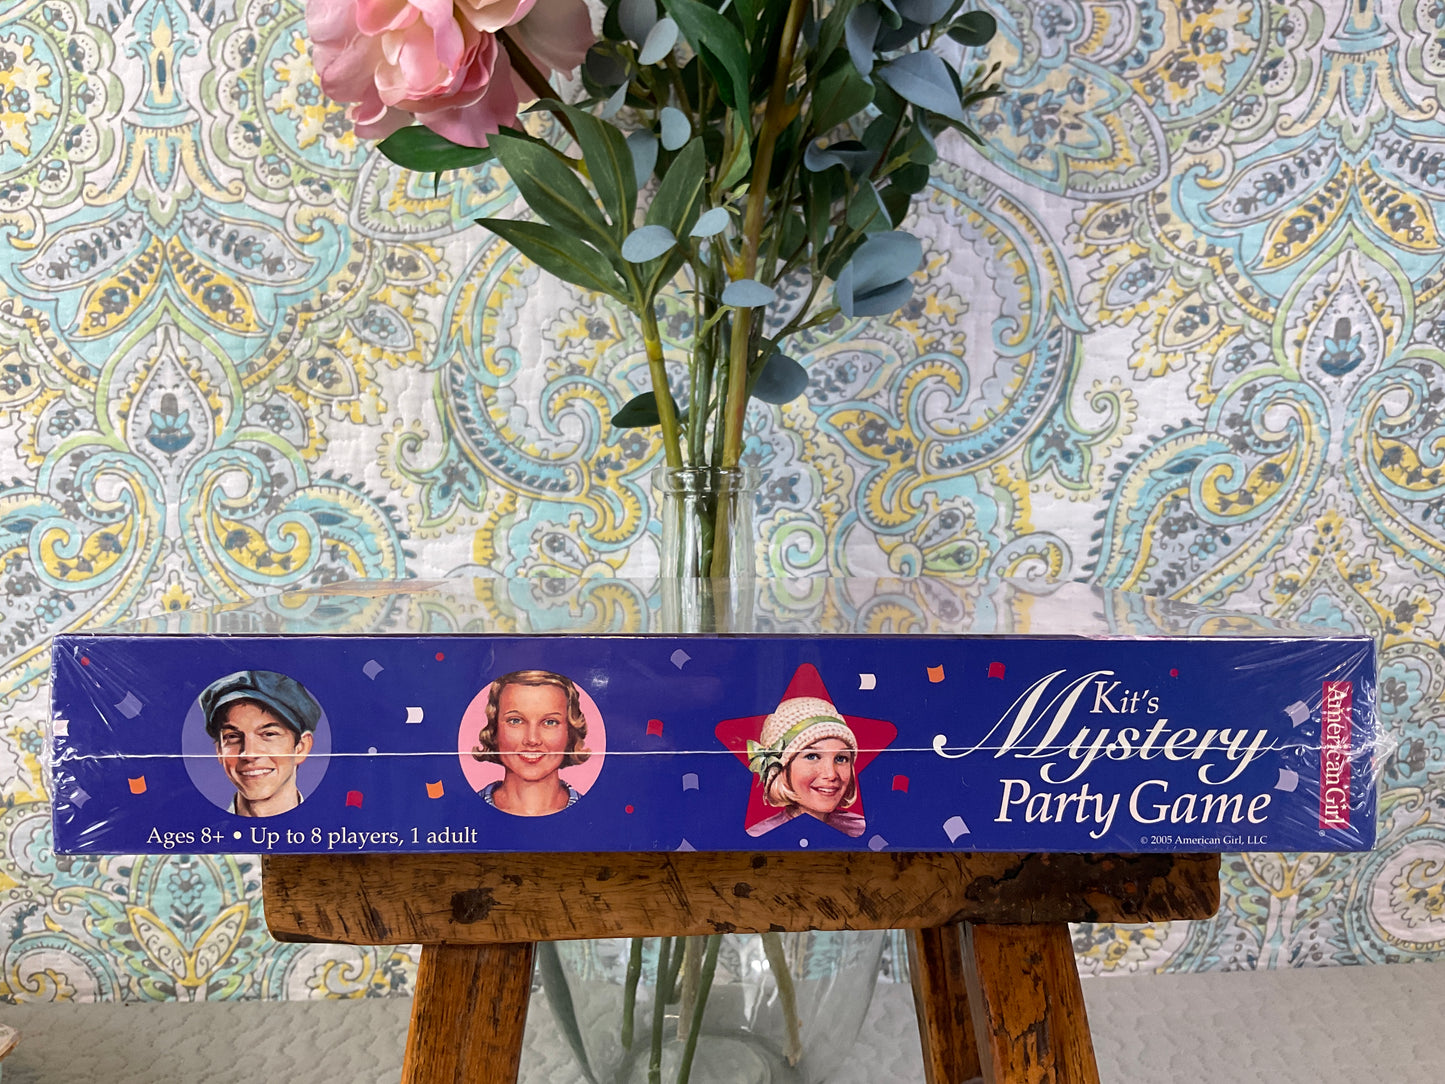 NEW!  American Girl Kit's Mystery Party Game